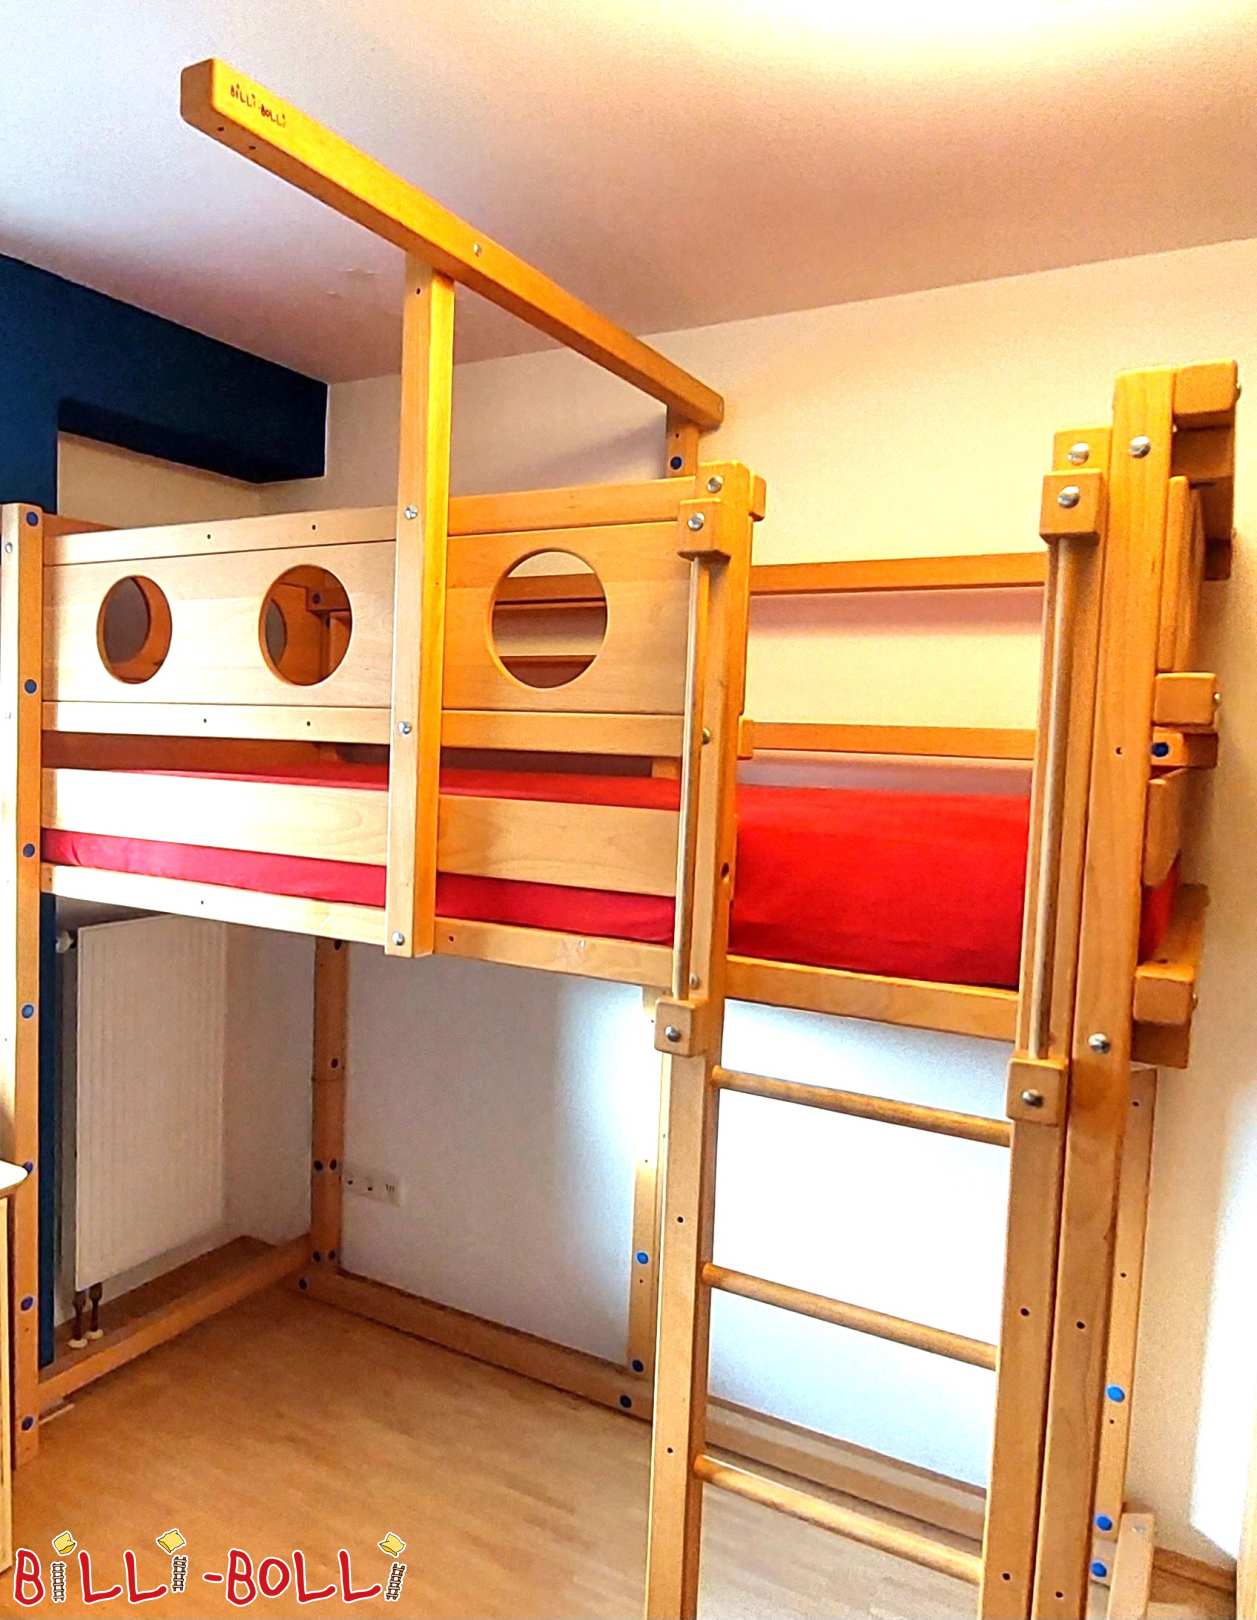 Loft bed in beech tree with pirate decoration, southern district of Munich (Category: Youth Loft Bed pre-owned)